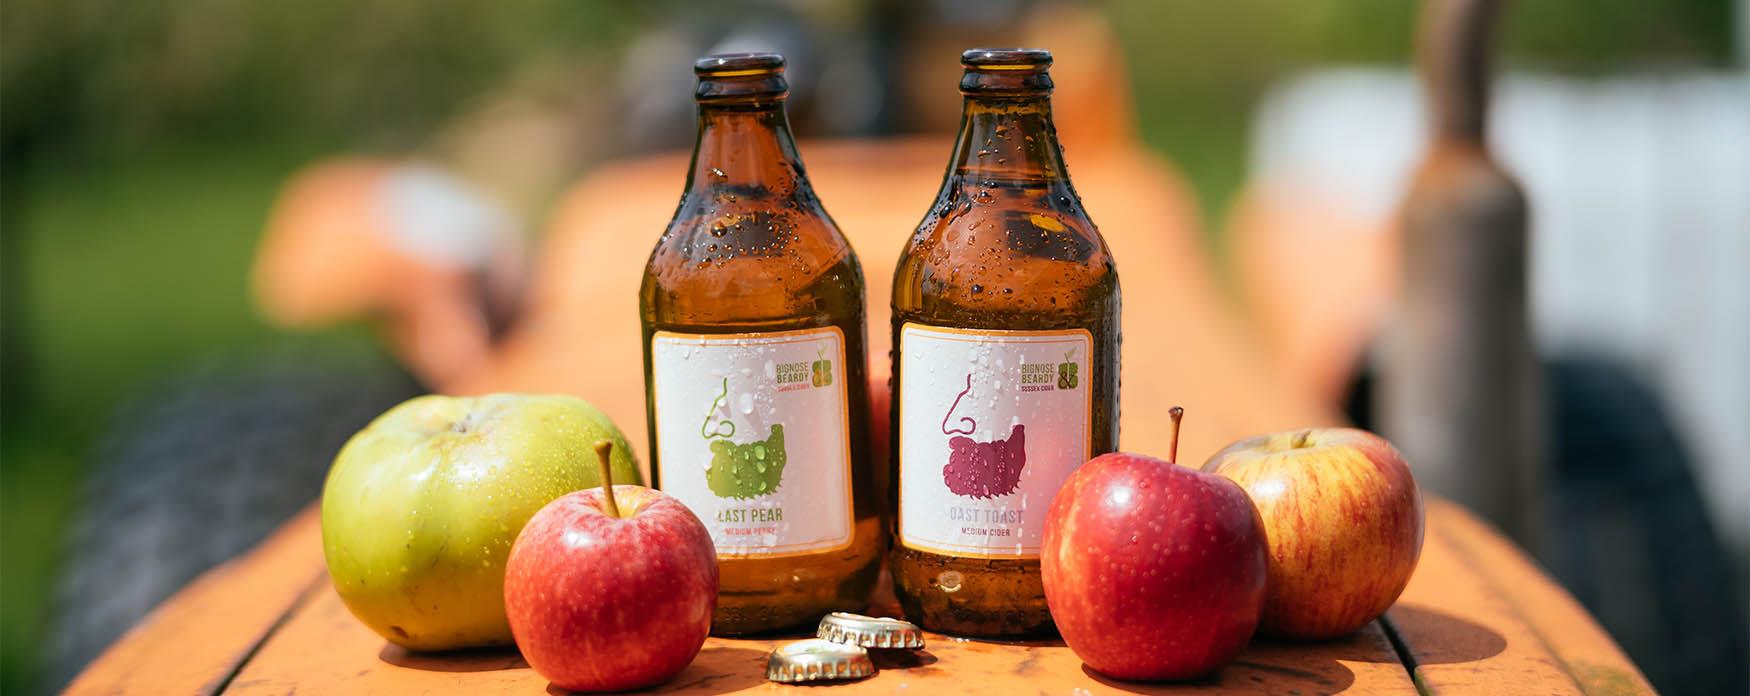 Bottles on Tractor with apples Bignose and Beardy